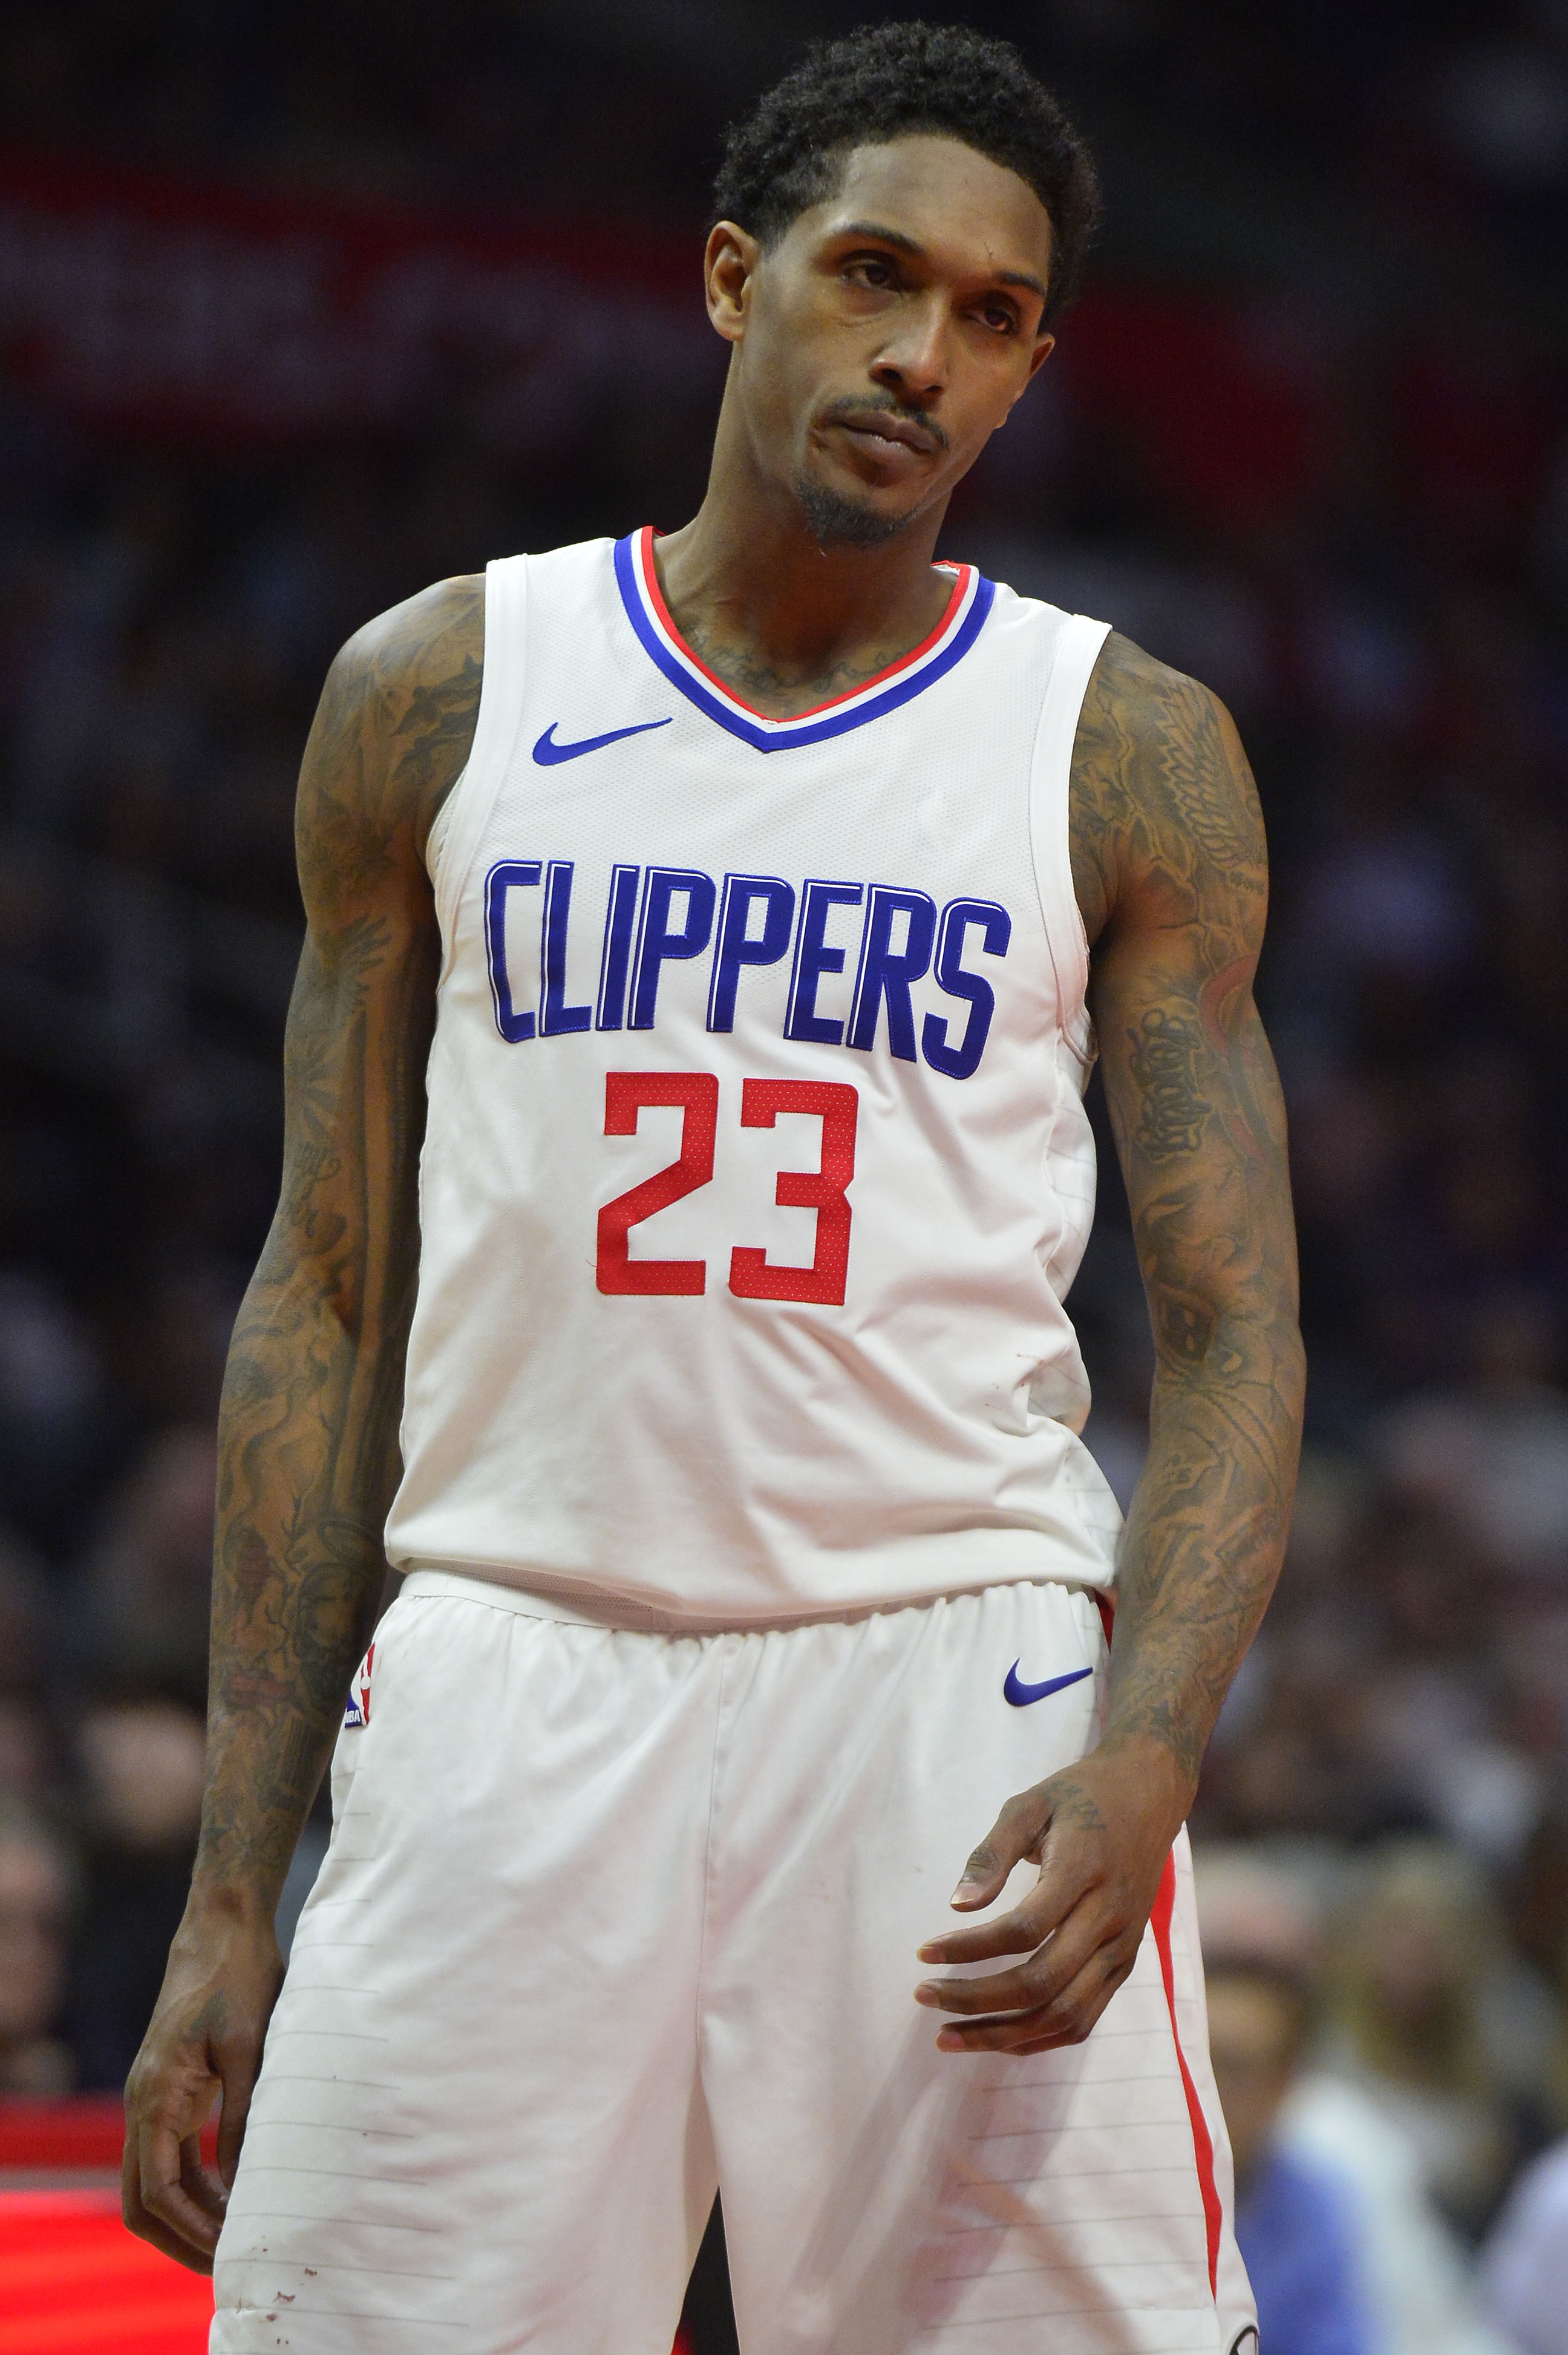 Lou Williams' impact on the Clippers has extended far beyond the